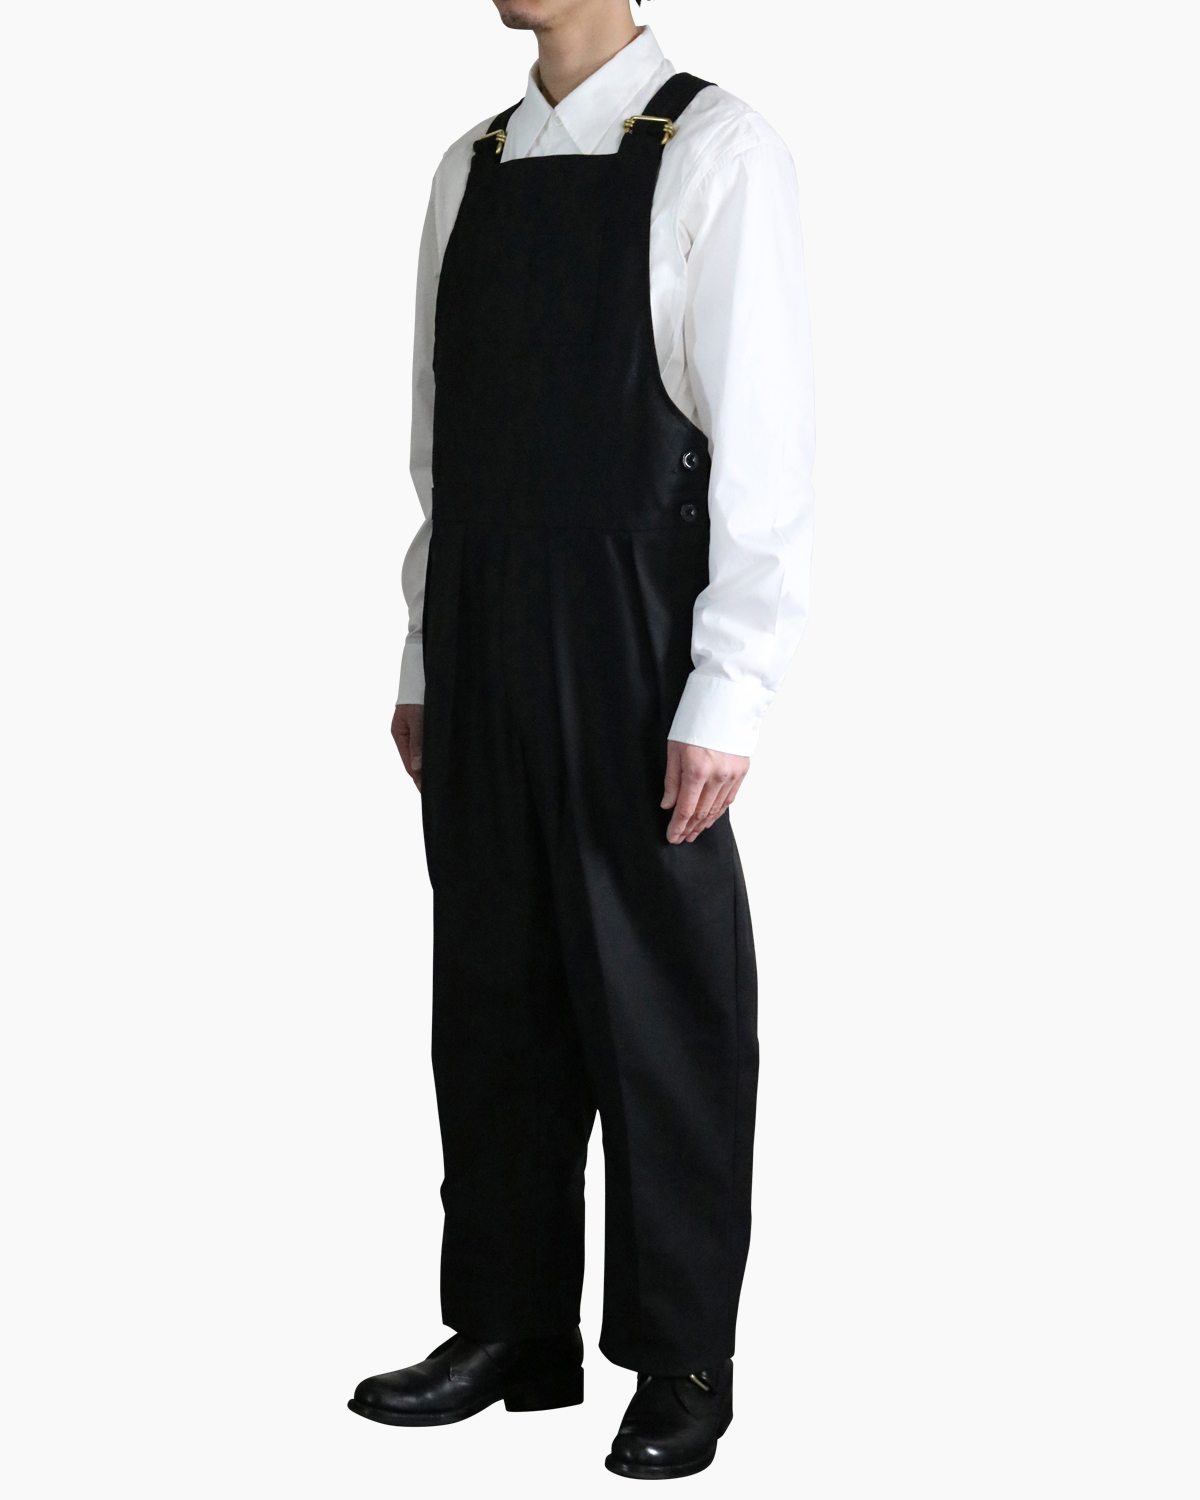 NEAT｜HOPSACK｜OVERALL - Black｜PRODUCT｜Continuer Inc.｜メガネ 